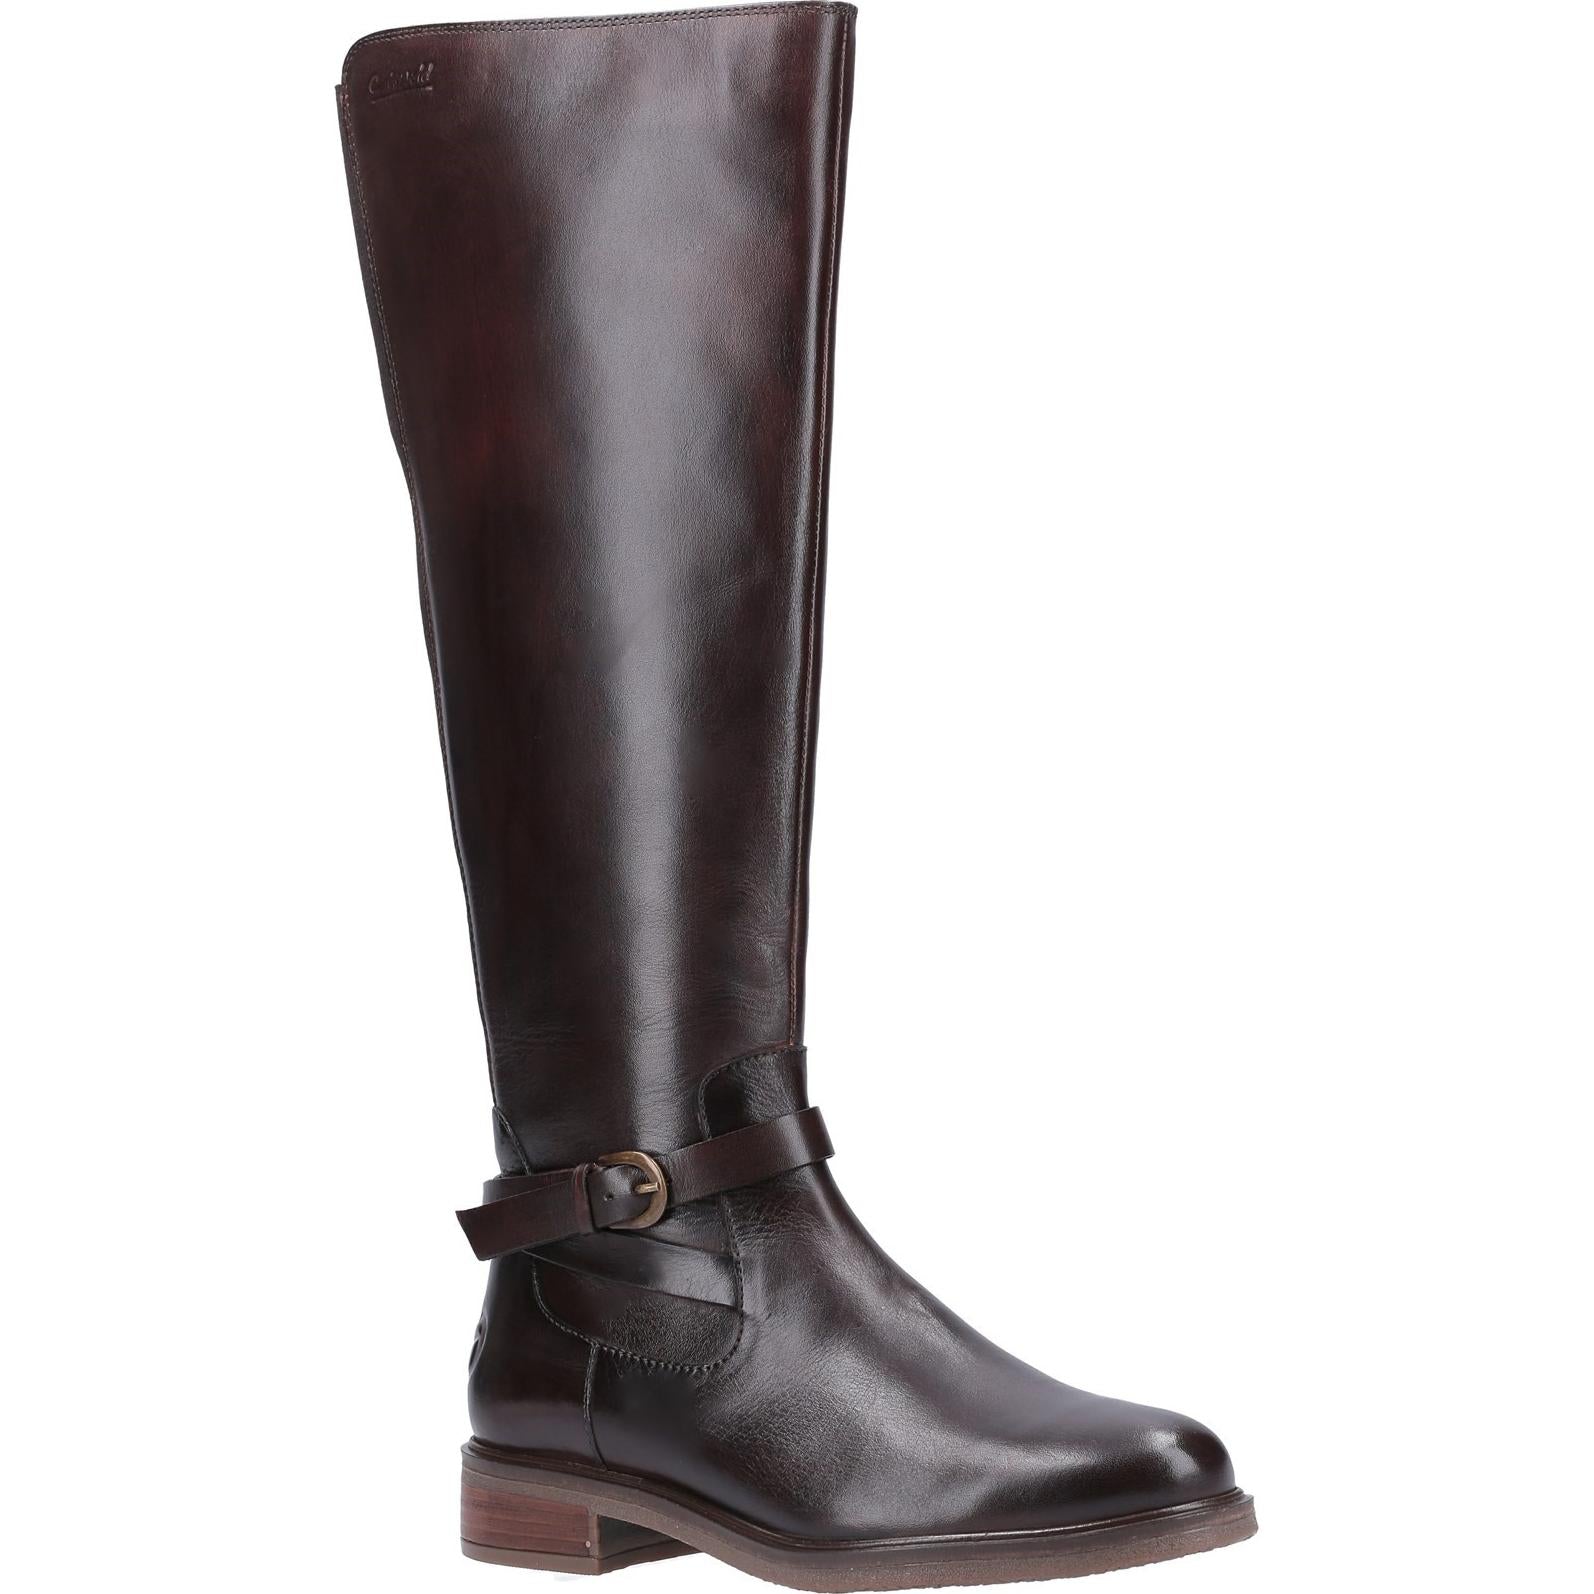 Cotswold Leafield Knee High Boots